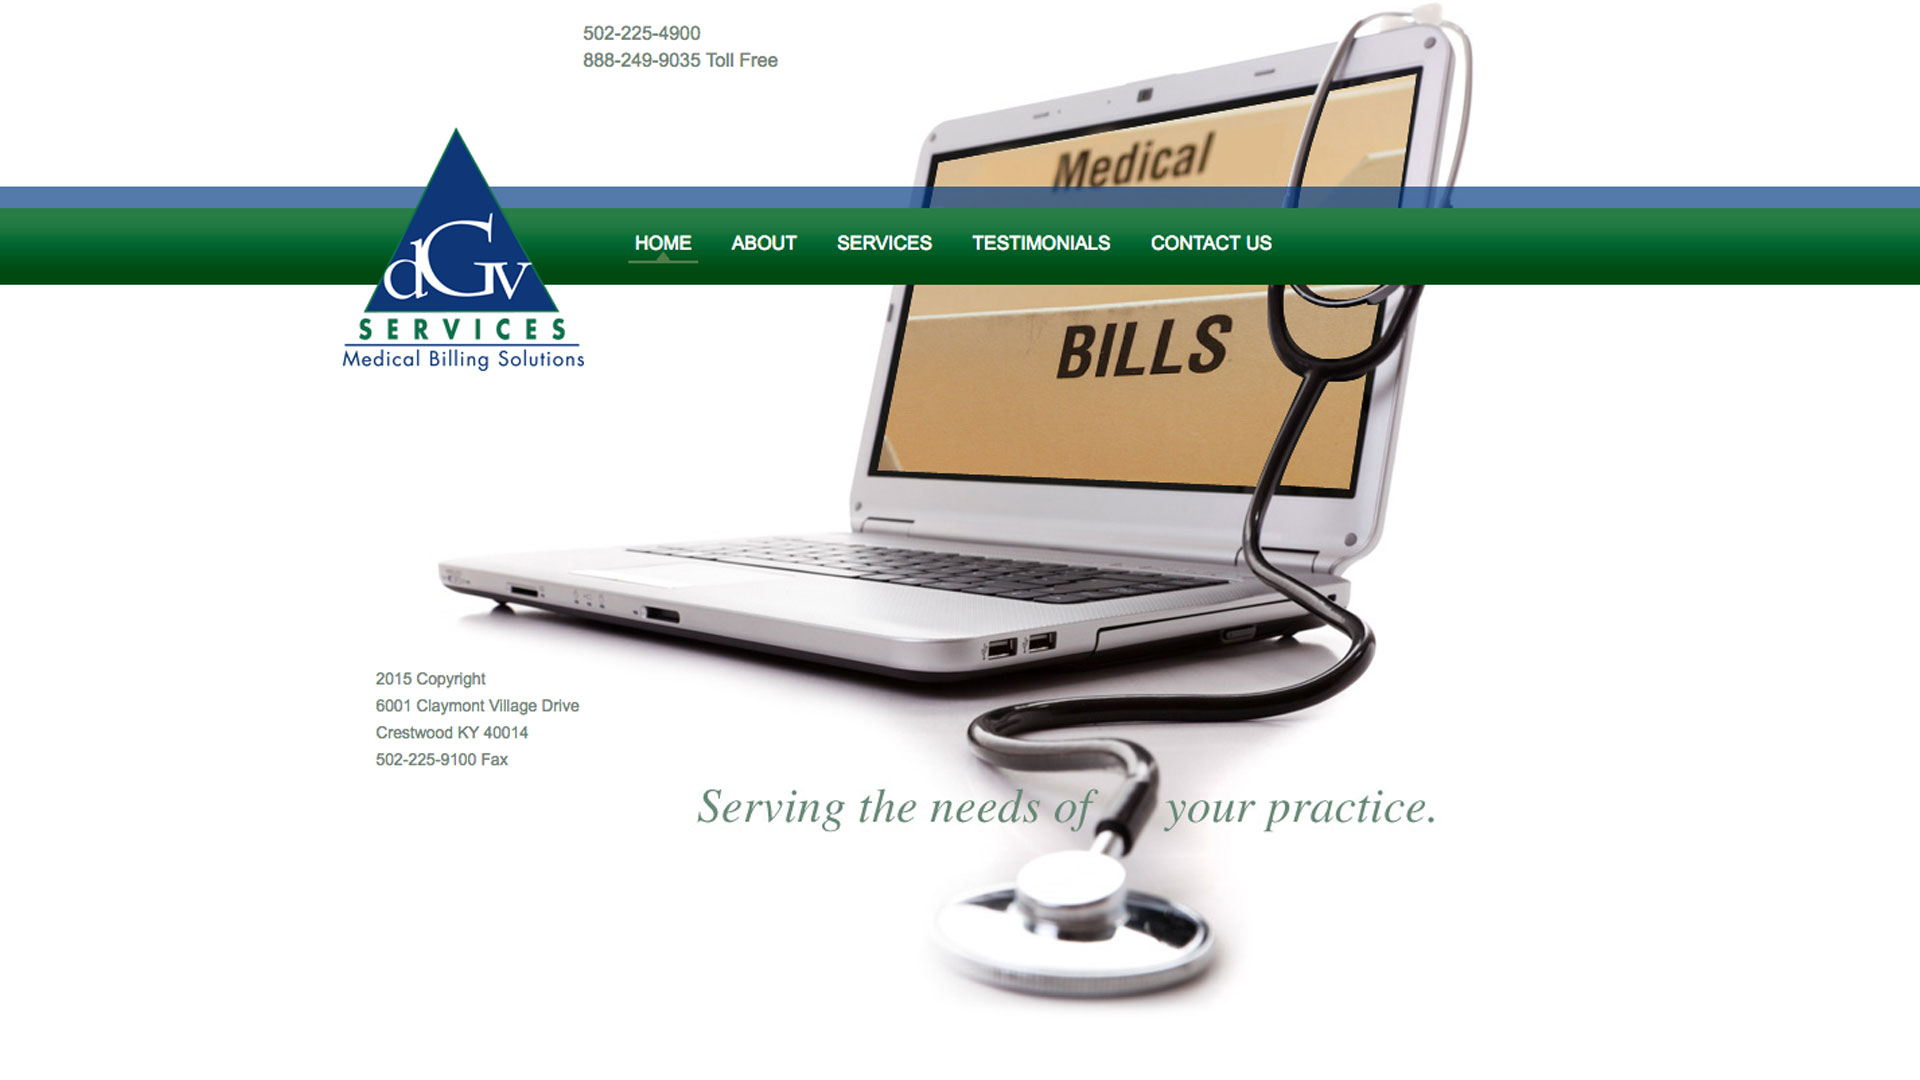 DGV Services website home page image